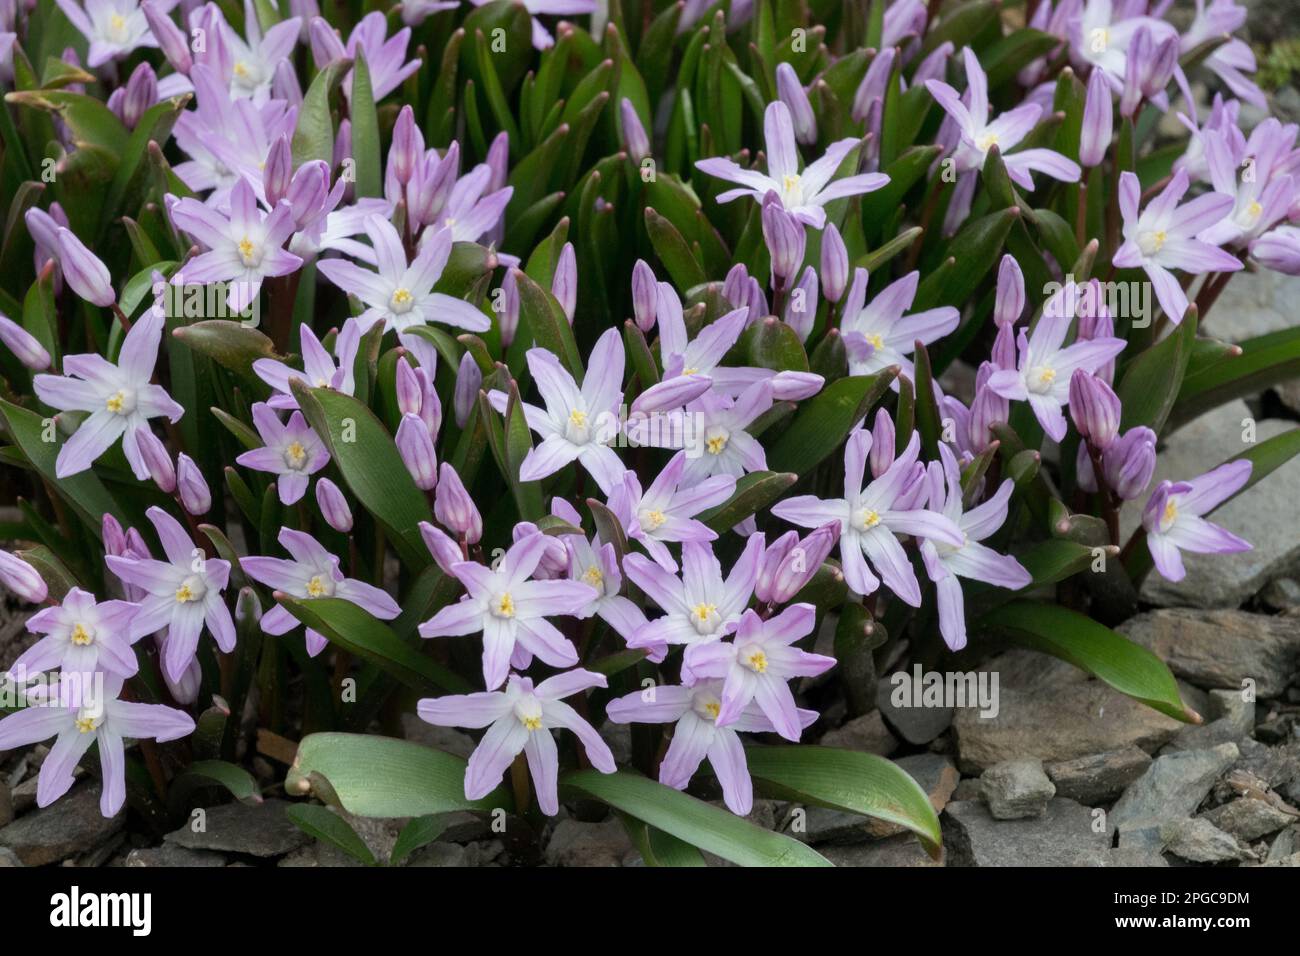 Glory-of-the-snow, Chionodoxa 'Pink Giant', Scilla, Rockery, Garden, Early spring, Hardy, Flowers, Cluster Stock Photo